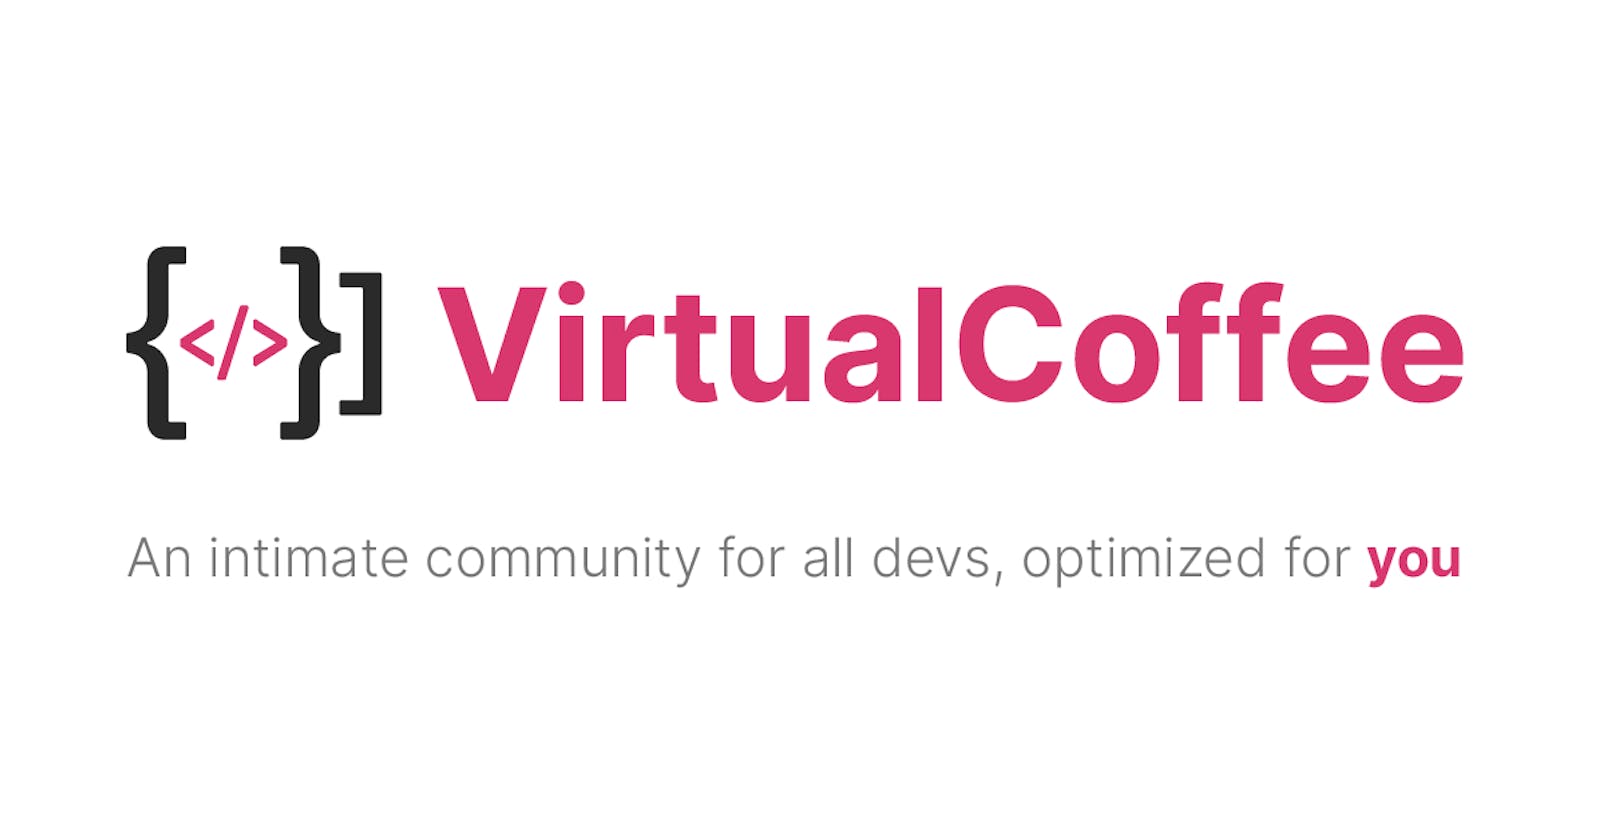 VirtualCoffee and my journey as a developer.